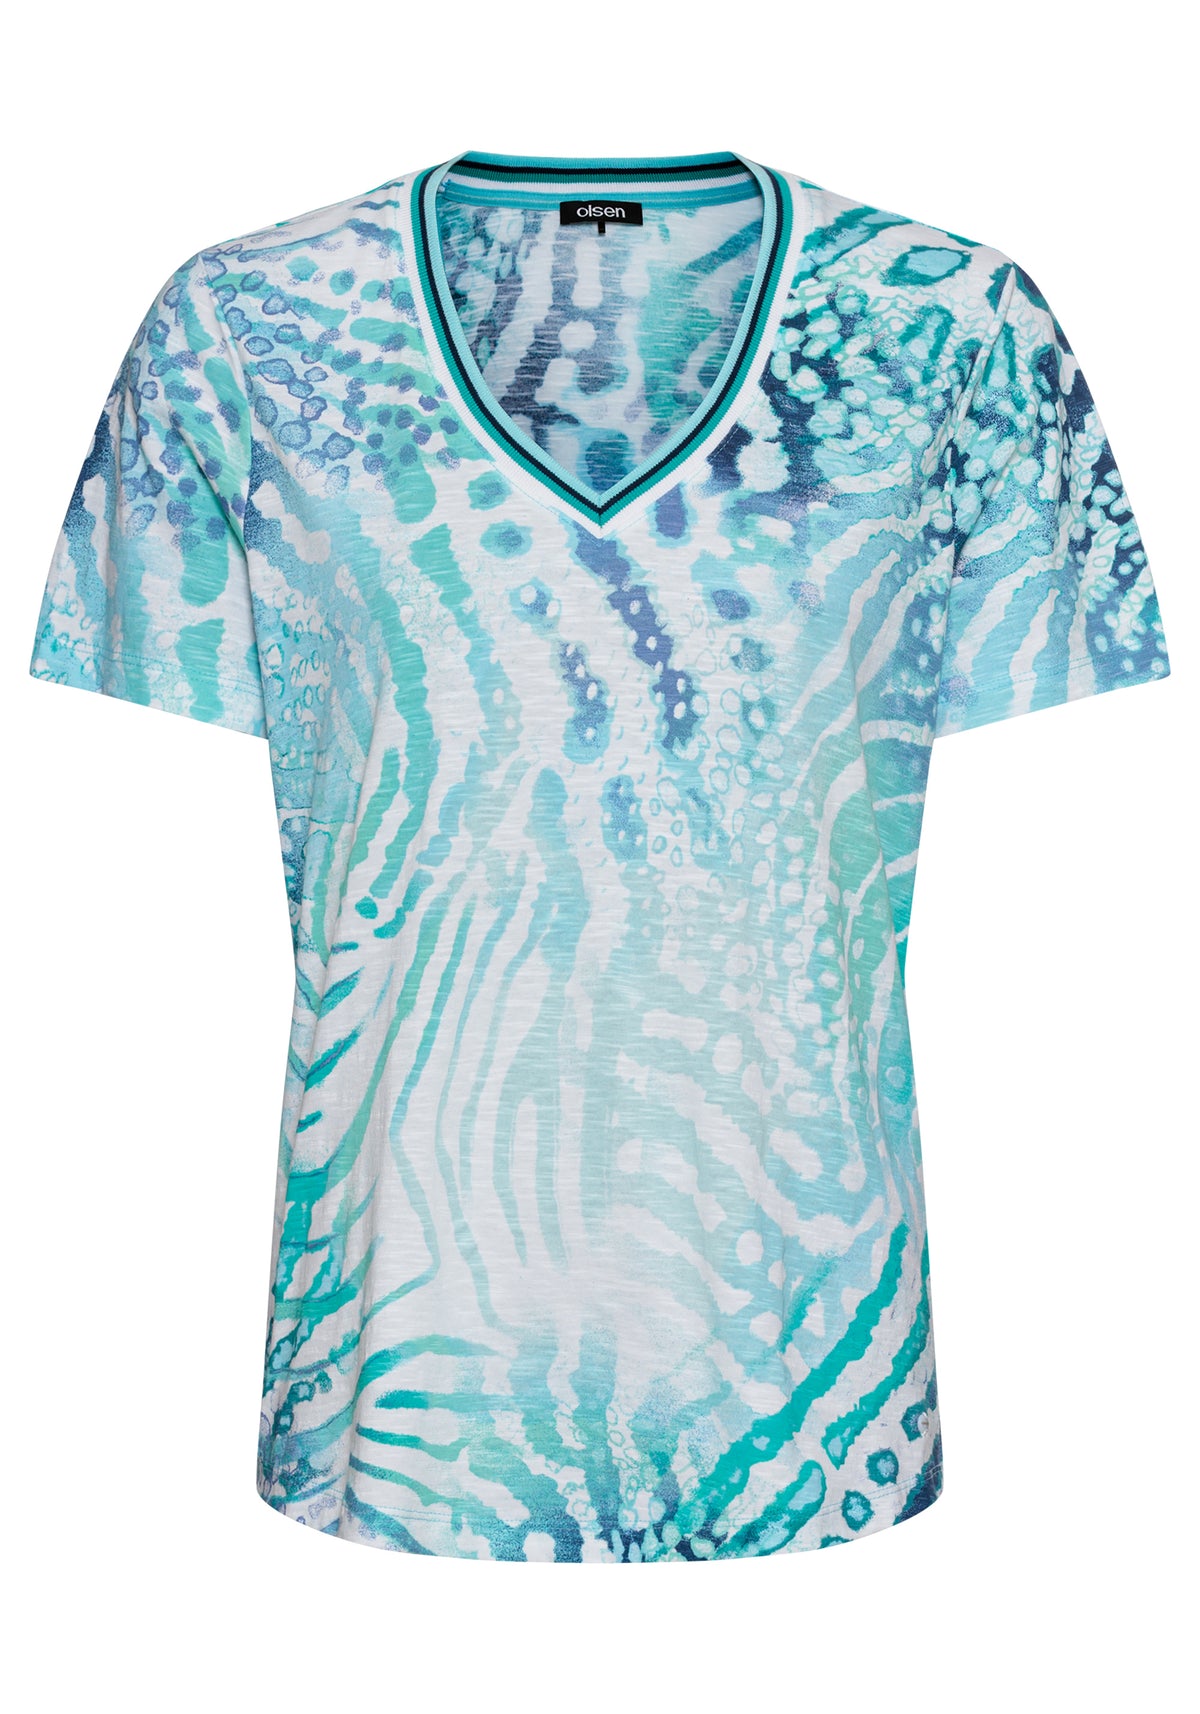 100% Cotton Short Sleeve Water and Placement Print T-Shirt